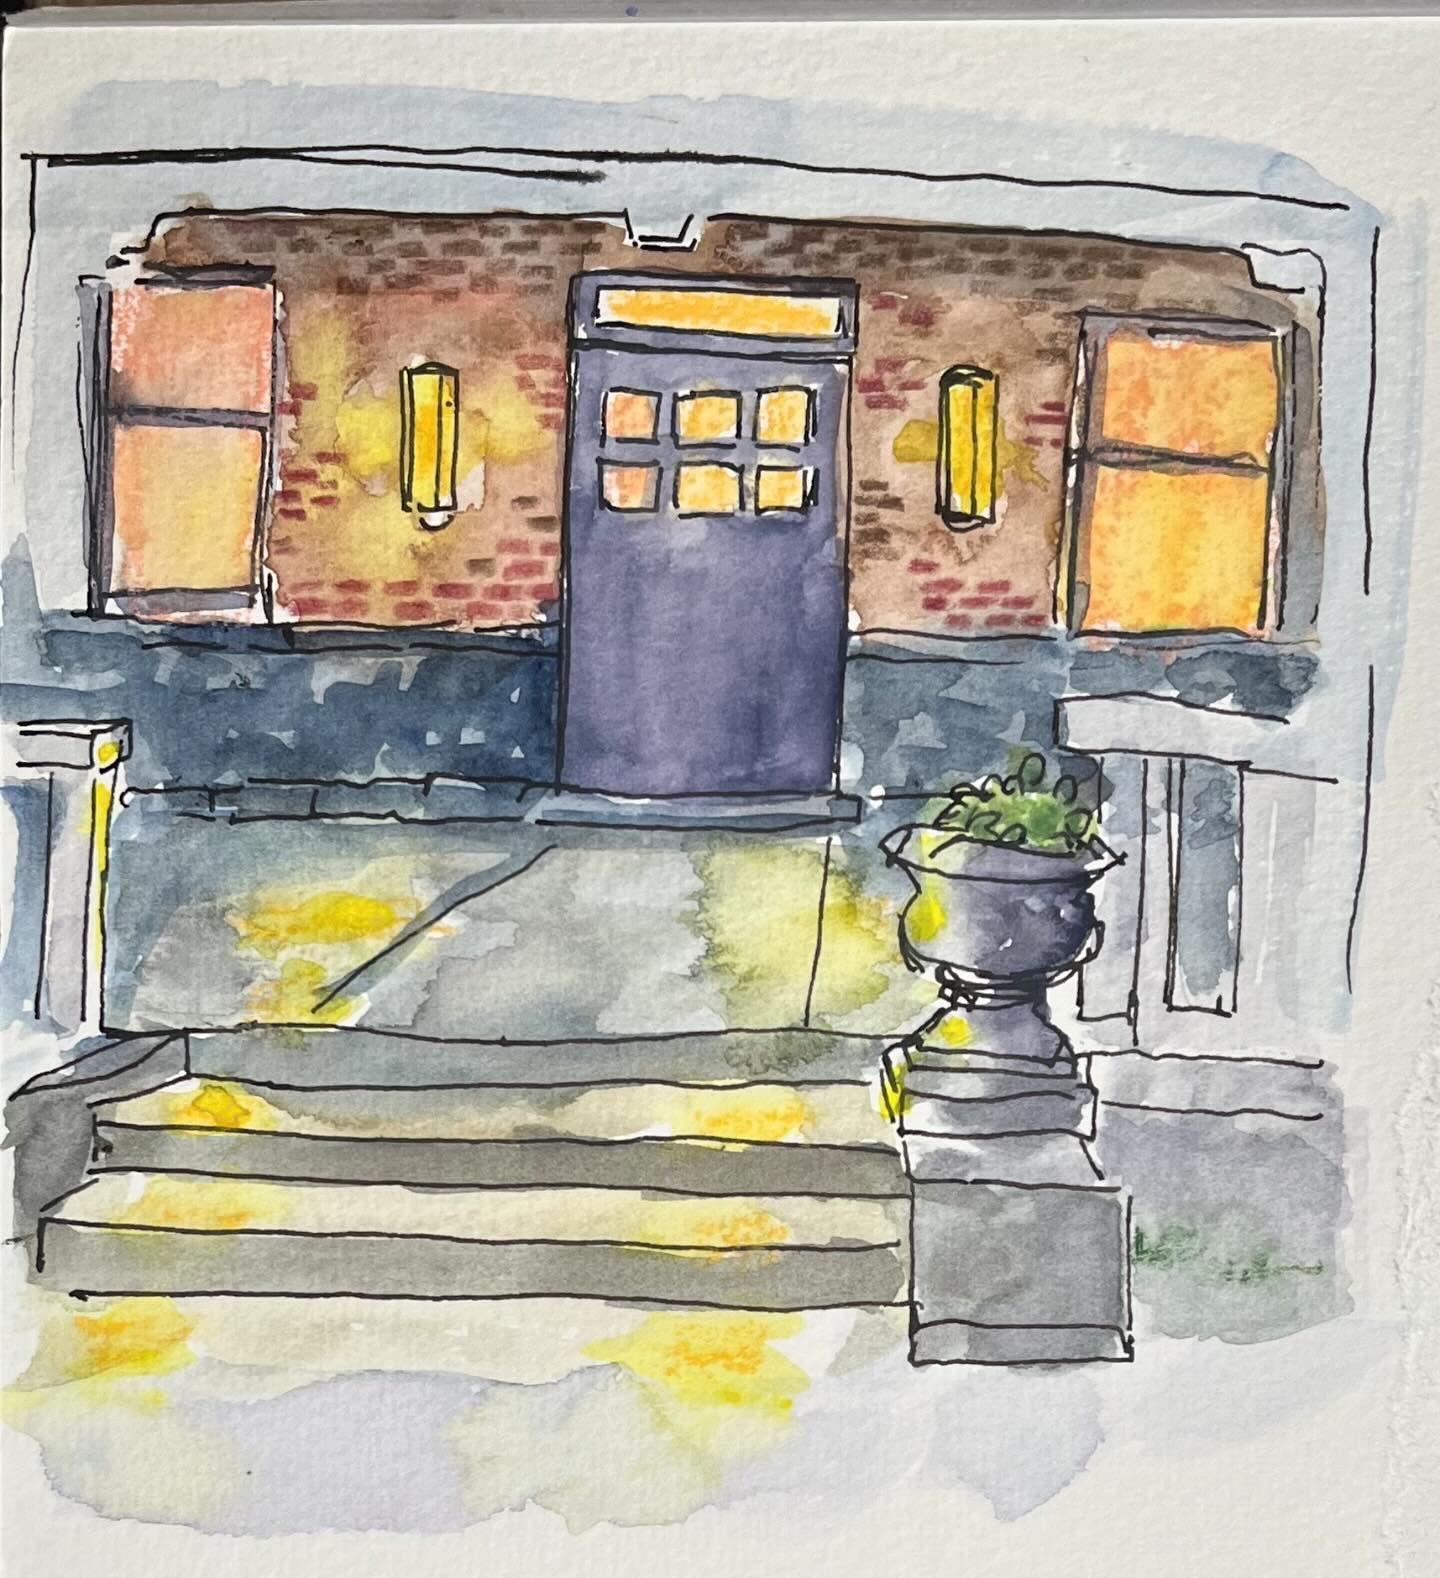 Last drawing of the weekend, inspired by a rainy photo by @thisplaceinhistory #sketchbook #inkandwatercolor #inkandwash #porch #dusk